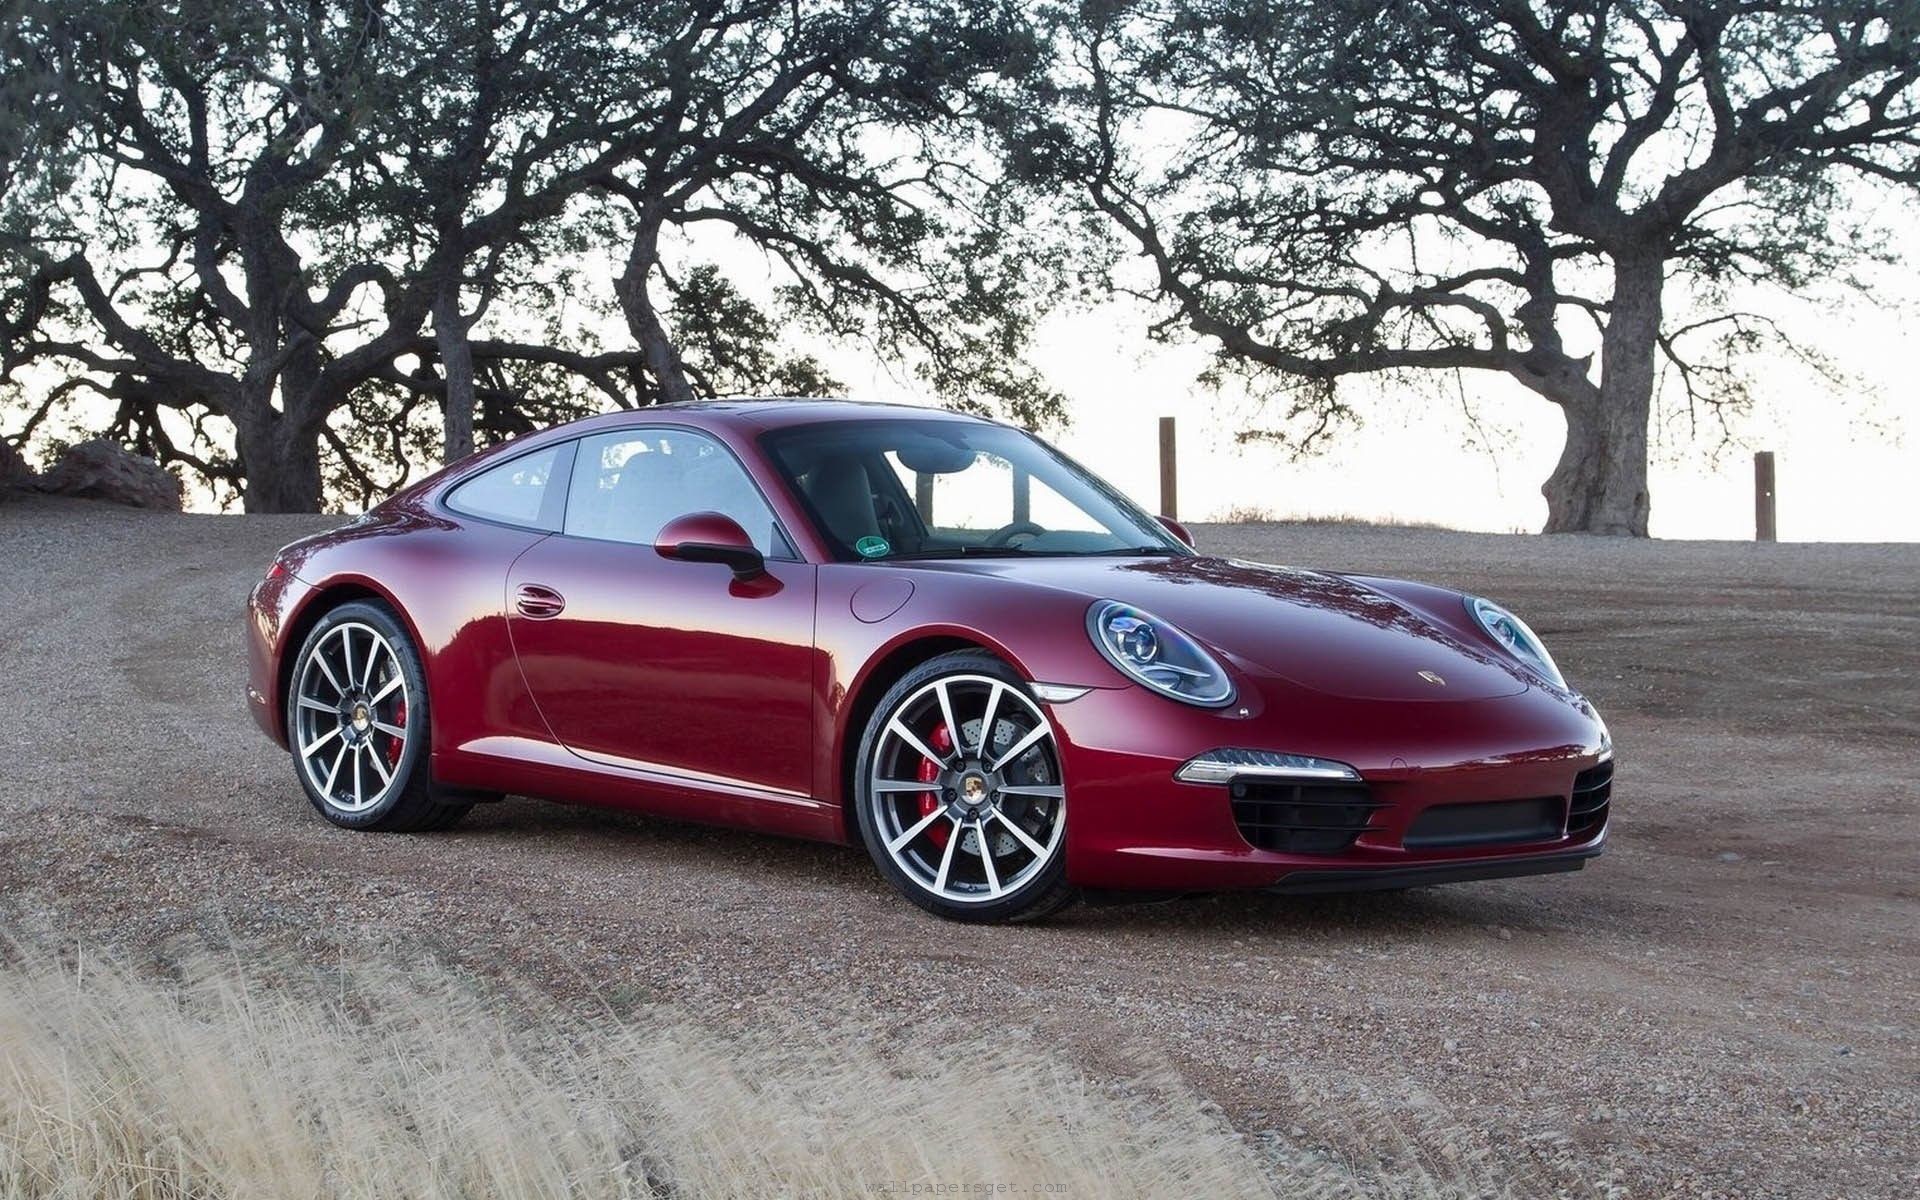 trees, Red, Germany, Turbo, Wheels, Sports, Cars, Roadster, Porsche